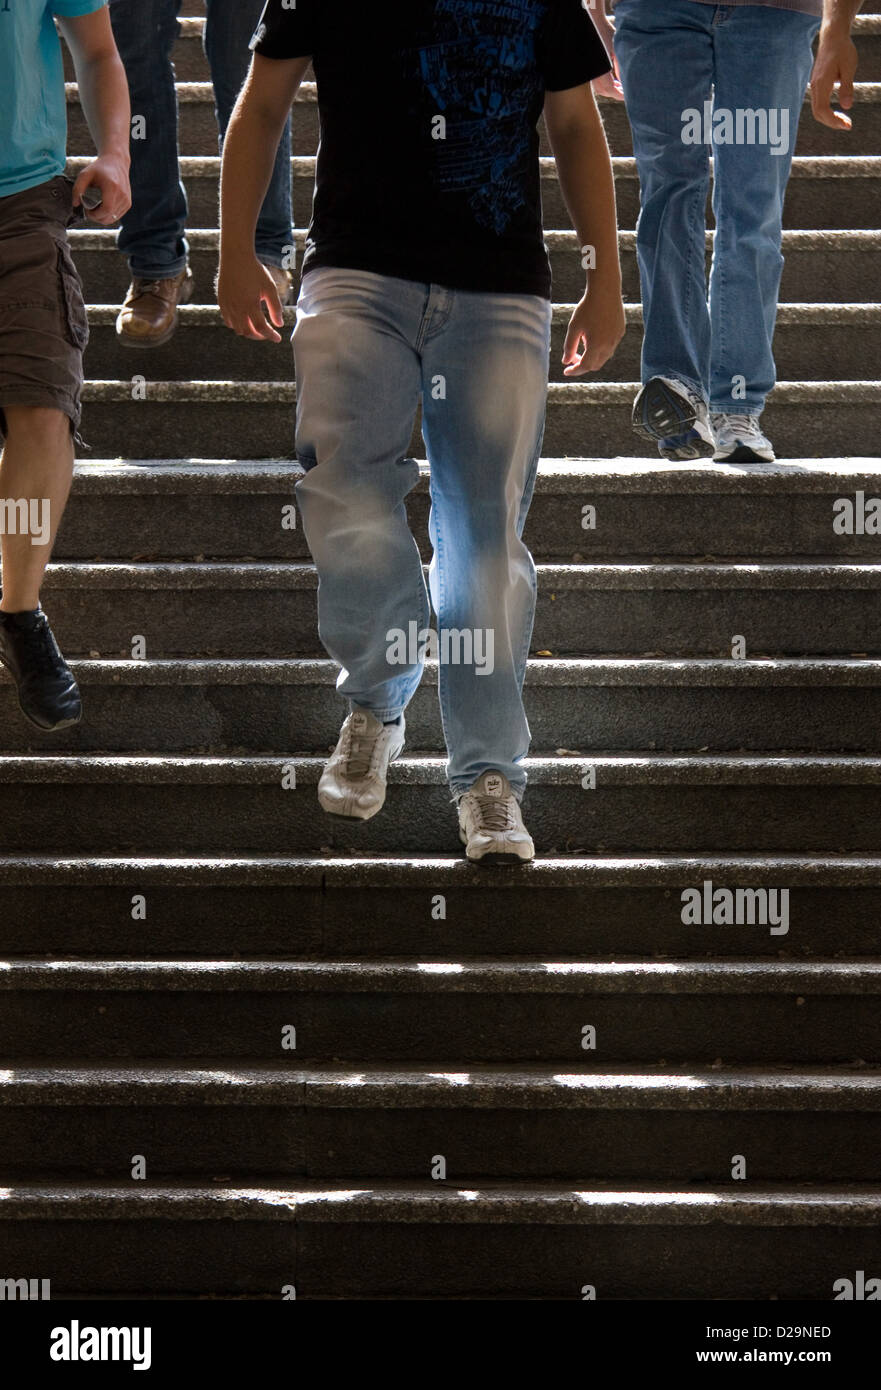 To Go Down The Stairs High Resolution Stock Photography and Images - Alamy